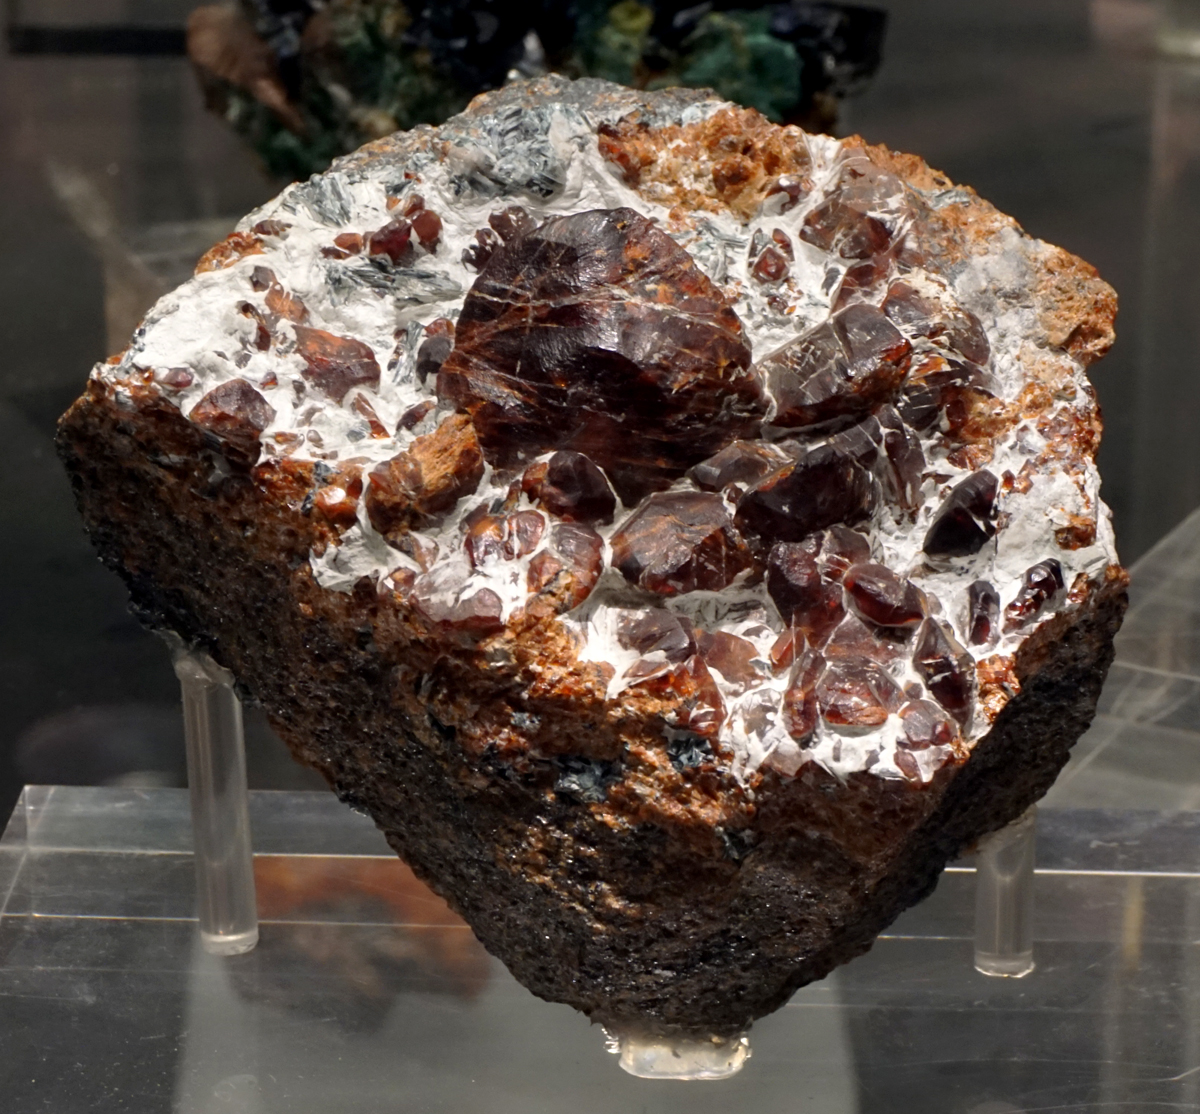 Large Chondrodite Crystal Cluster from Tilly Foster Fine, Brewster, Putnam Co., New York